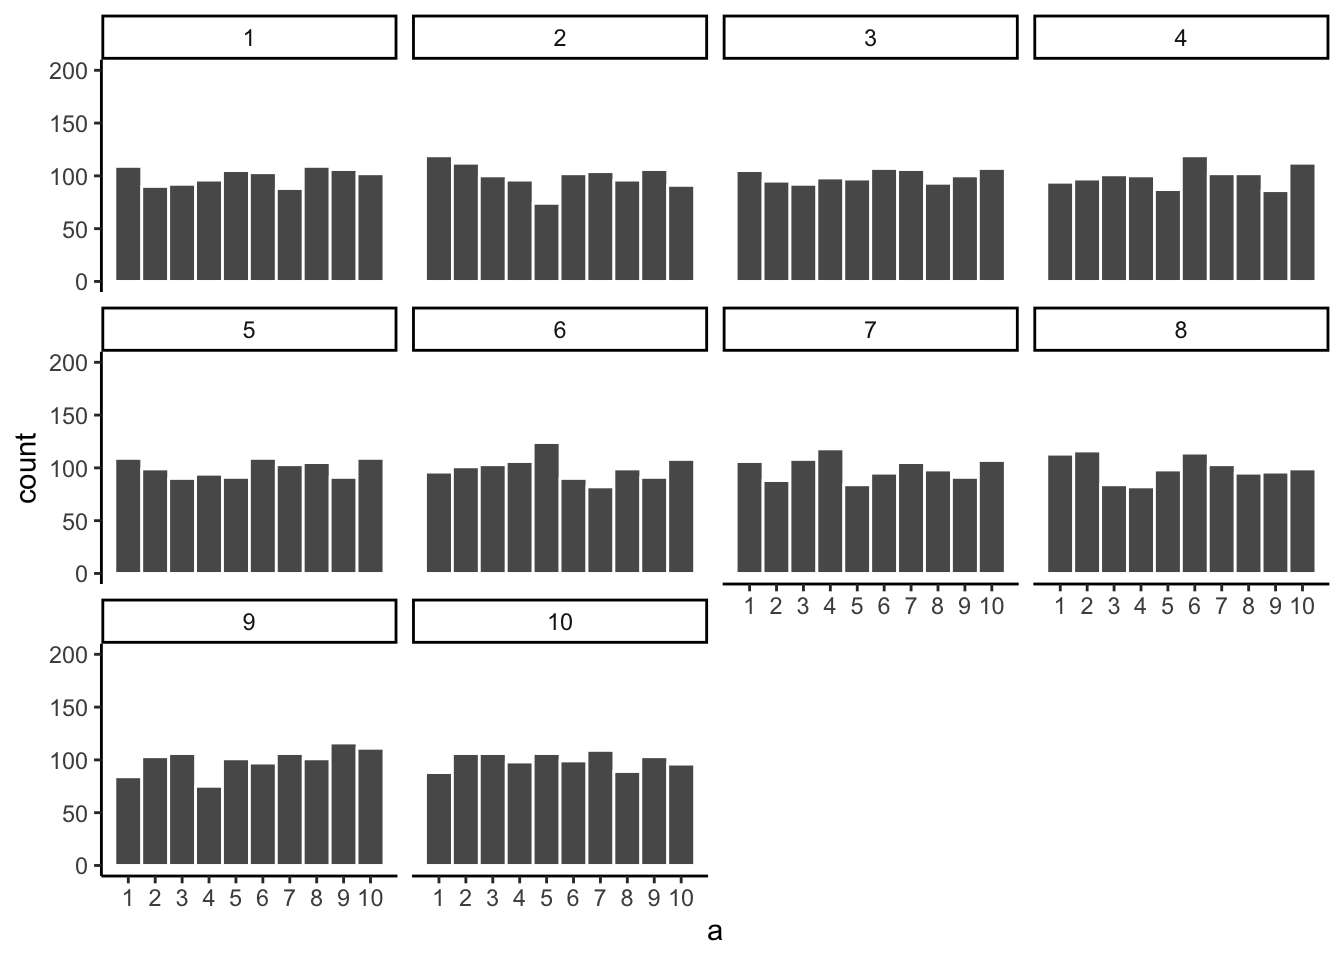 Histograms for different samples from a uniform distribution. Sample-size = 1000 for each sample.